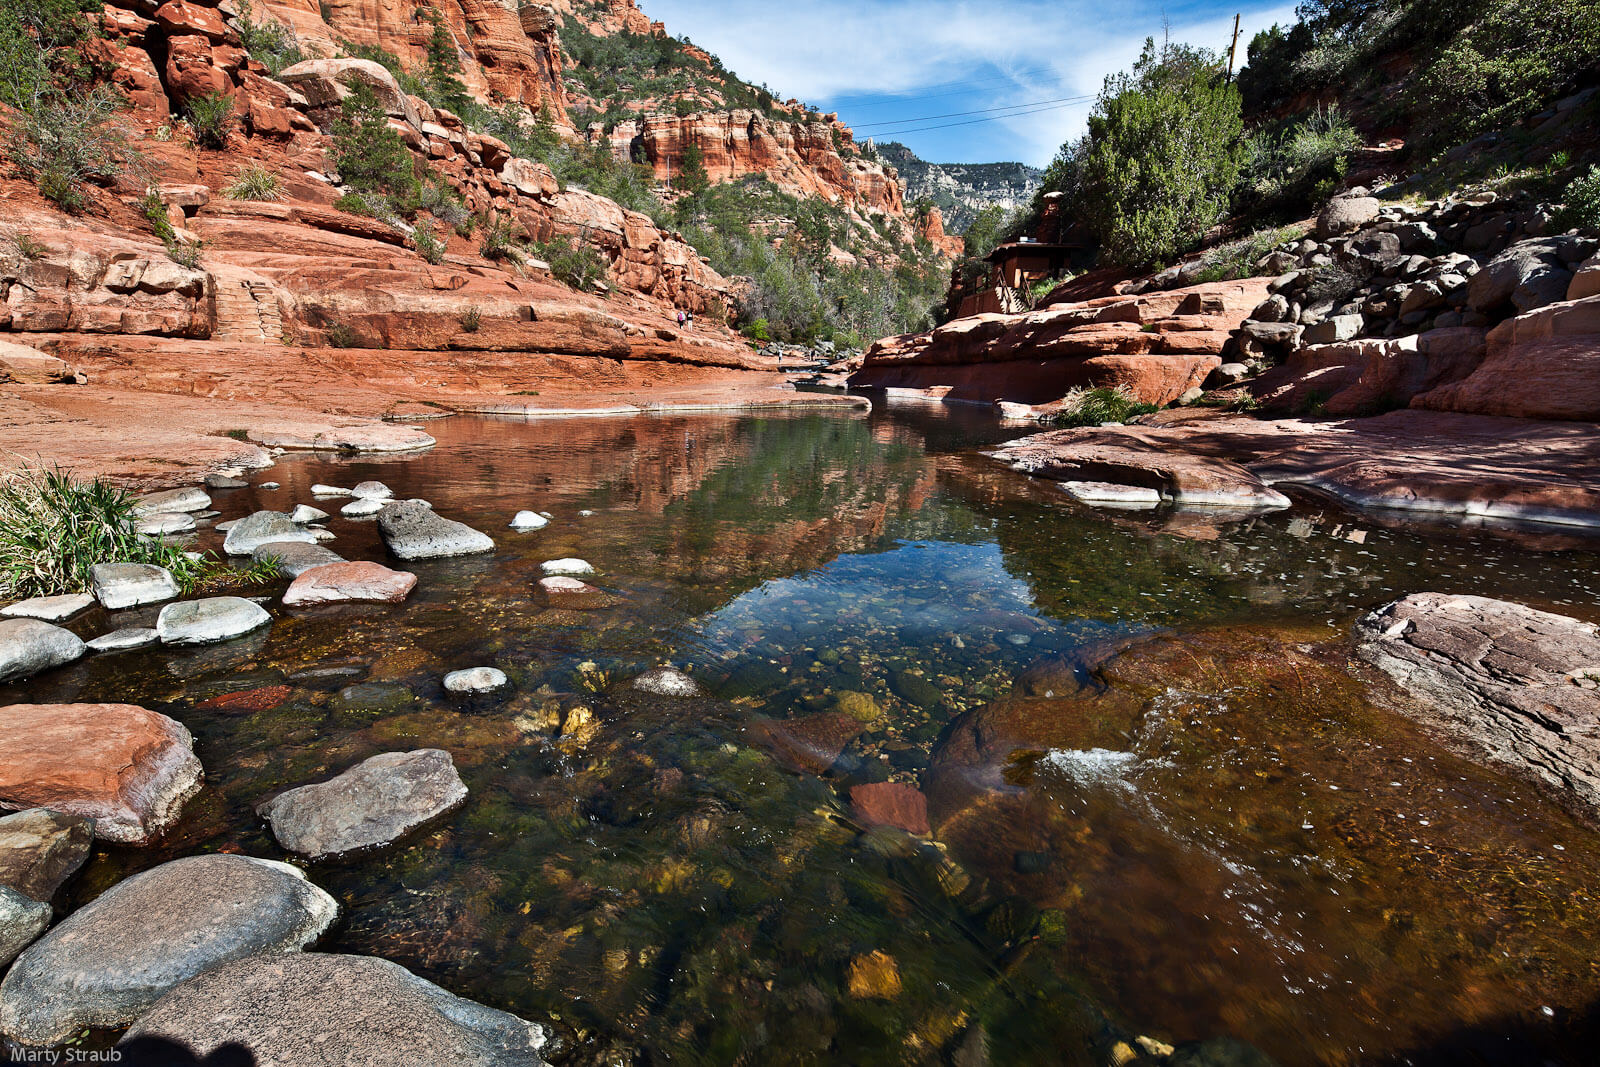 Stagnant clean water reflects the red Sedona mountains.
parksphotos.com